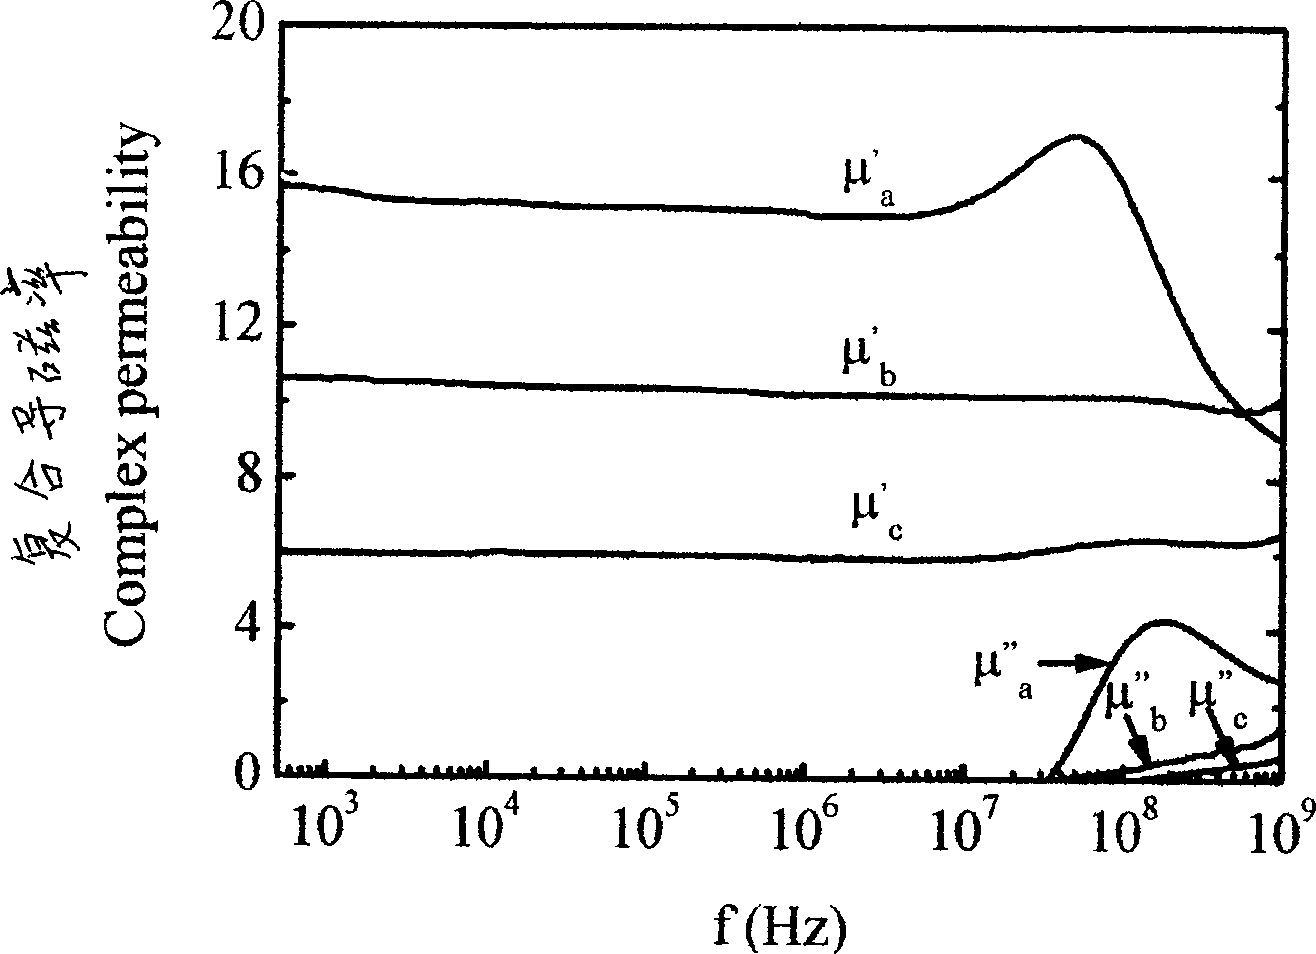 Core/shell structure containing Fe/SiO2 composite nano particles with high stability and method for making same